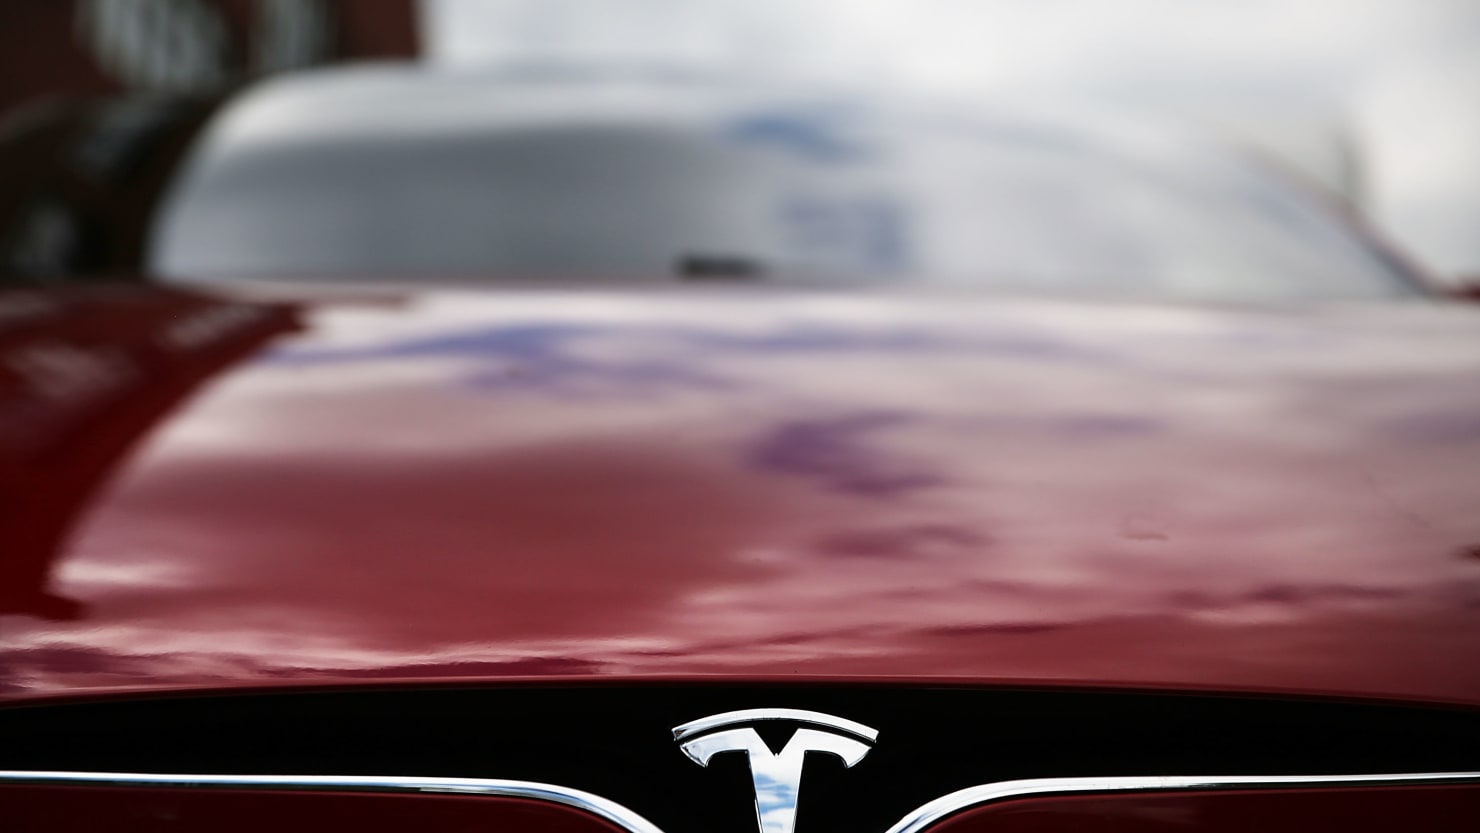 No one behind the wheel in the Tesla car accident that killed two